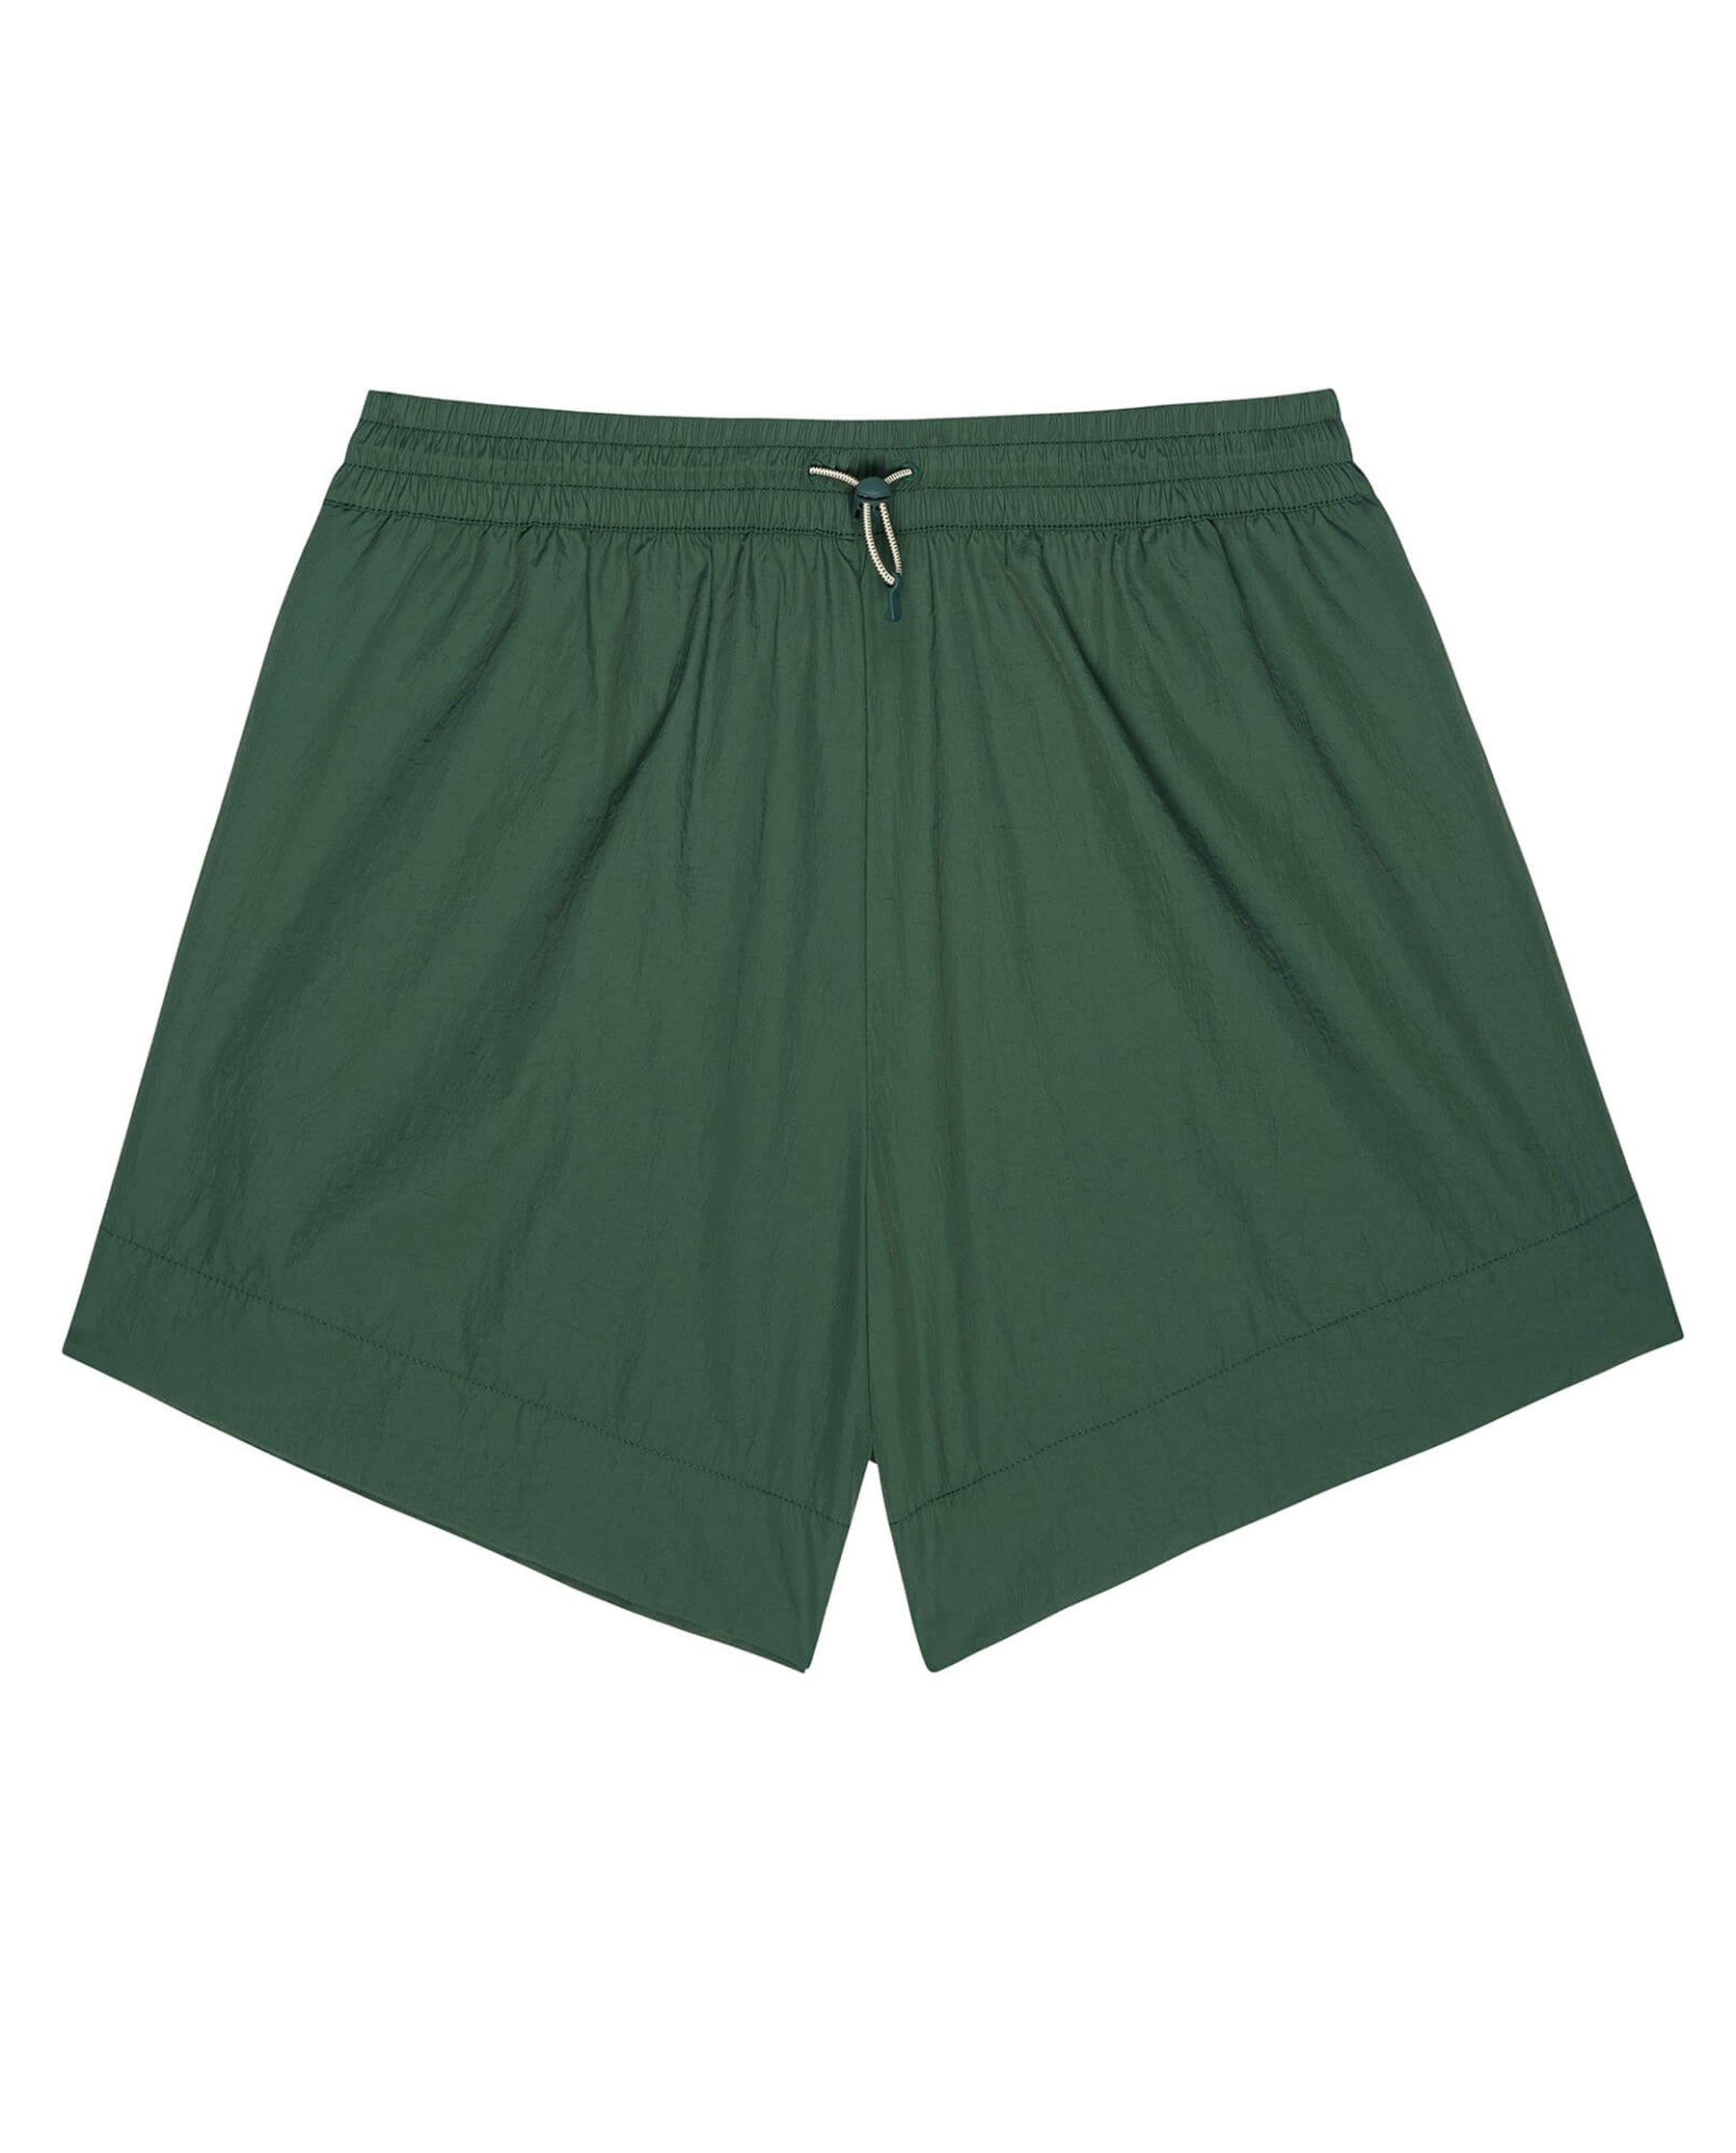 The Rover Short. -- Moss SHORTS THE GREAT. SP24 TGO